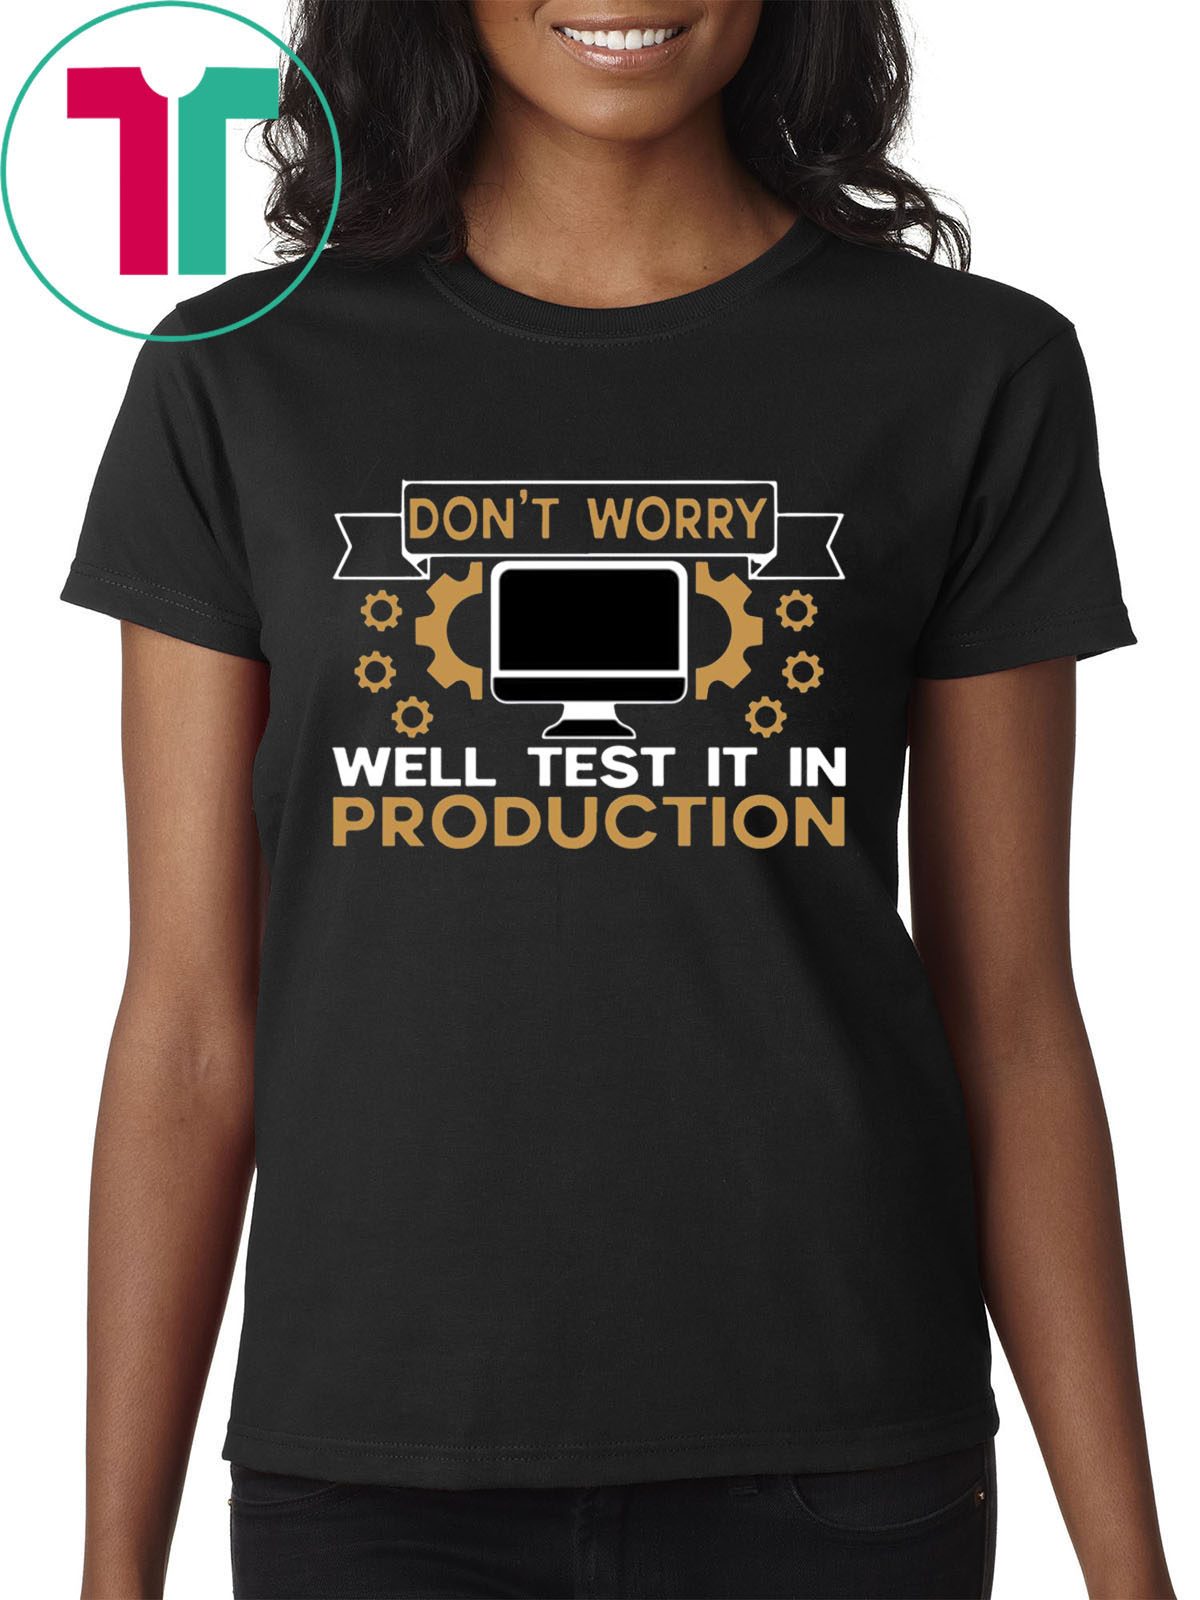 Don’t Worry Well Test It In Production T-Shirt - OrderQuilt.com